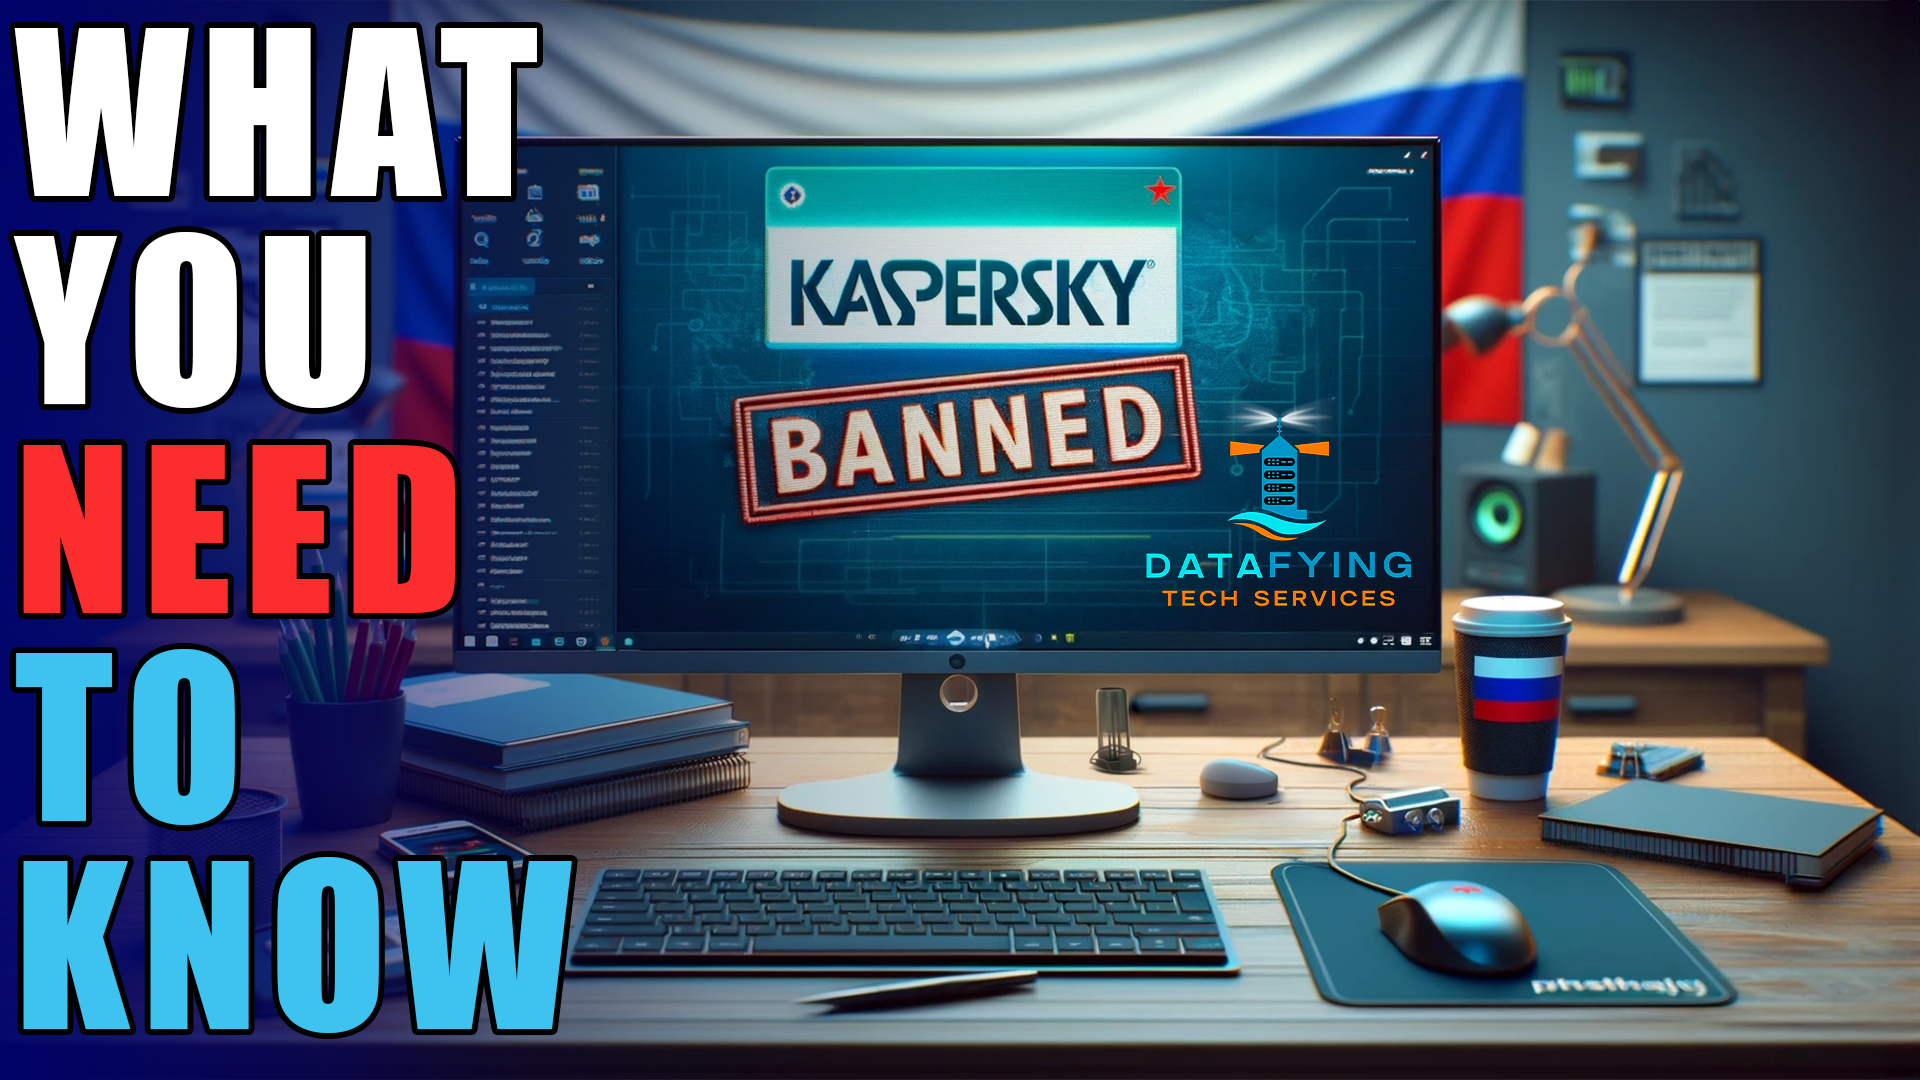 Computer screen showing "Kaspersky Banned" message with a Russian flag in the background, highlighting essential information for small businesses about the Kaspersky ban. Created for Datafying Tech Services, LLC.